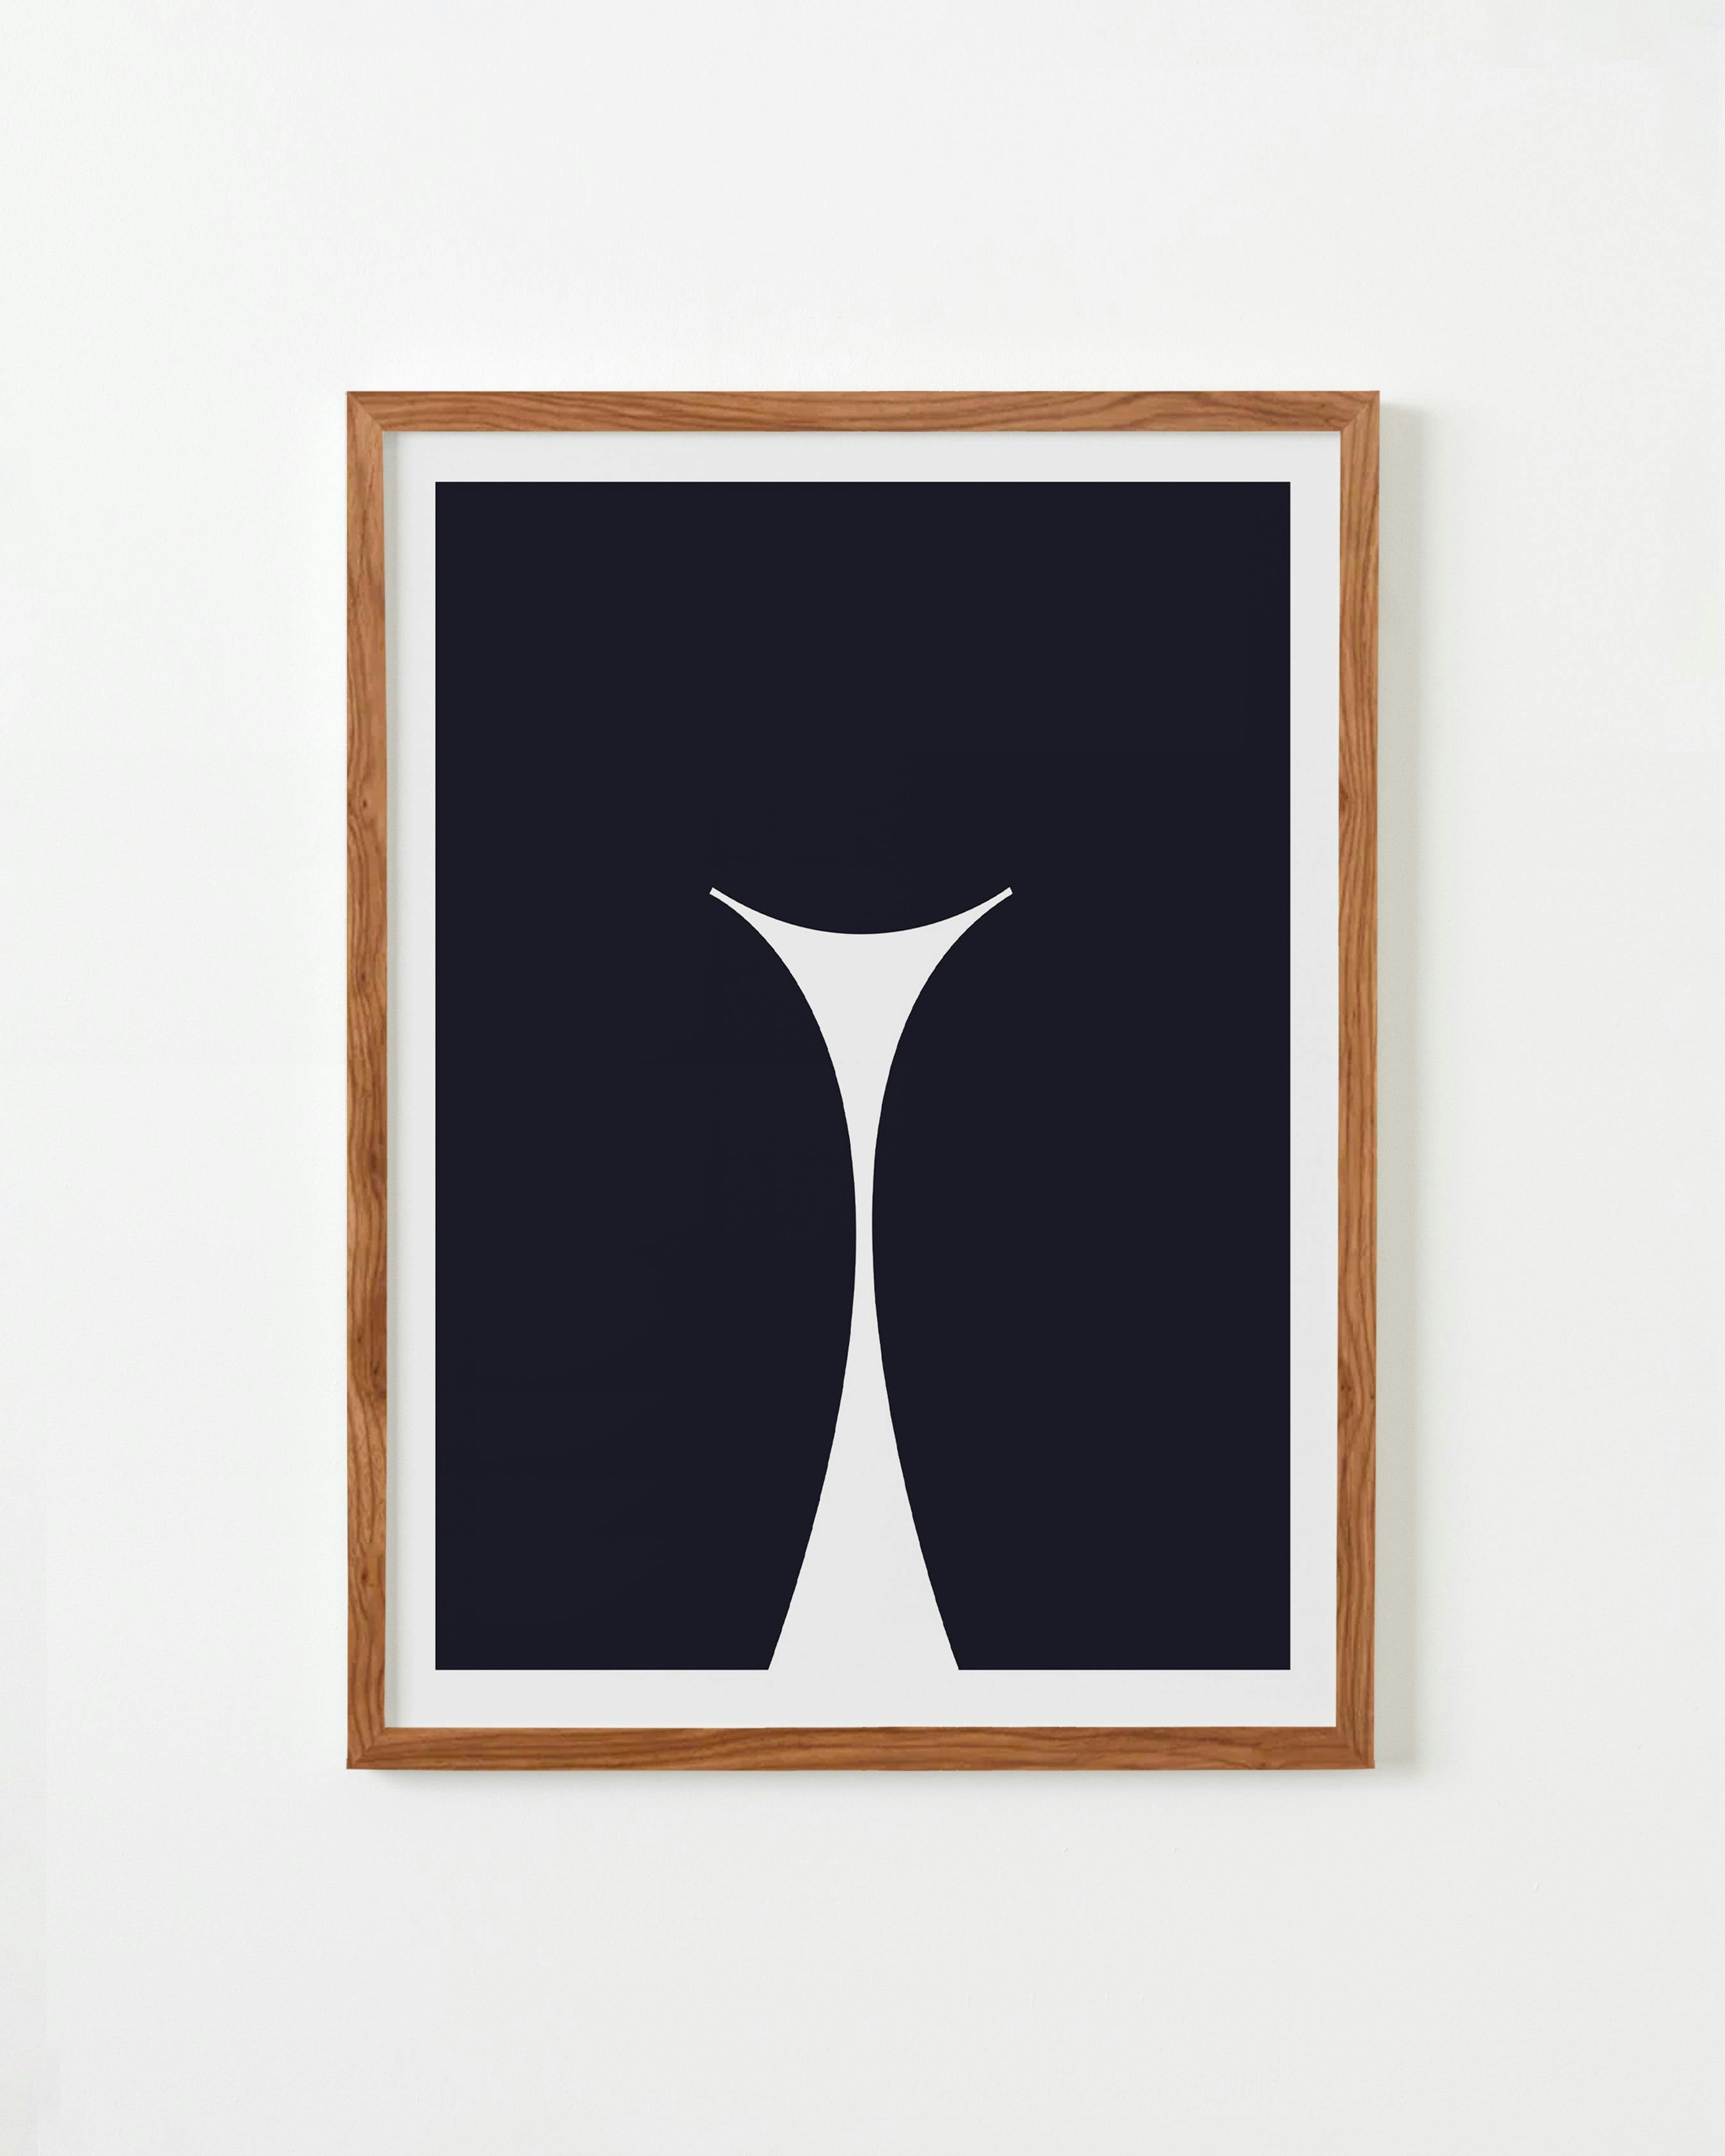 Print by Caroline Walls titled "The Curve Collection 01".